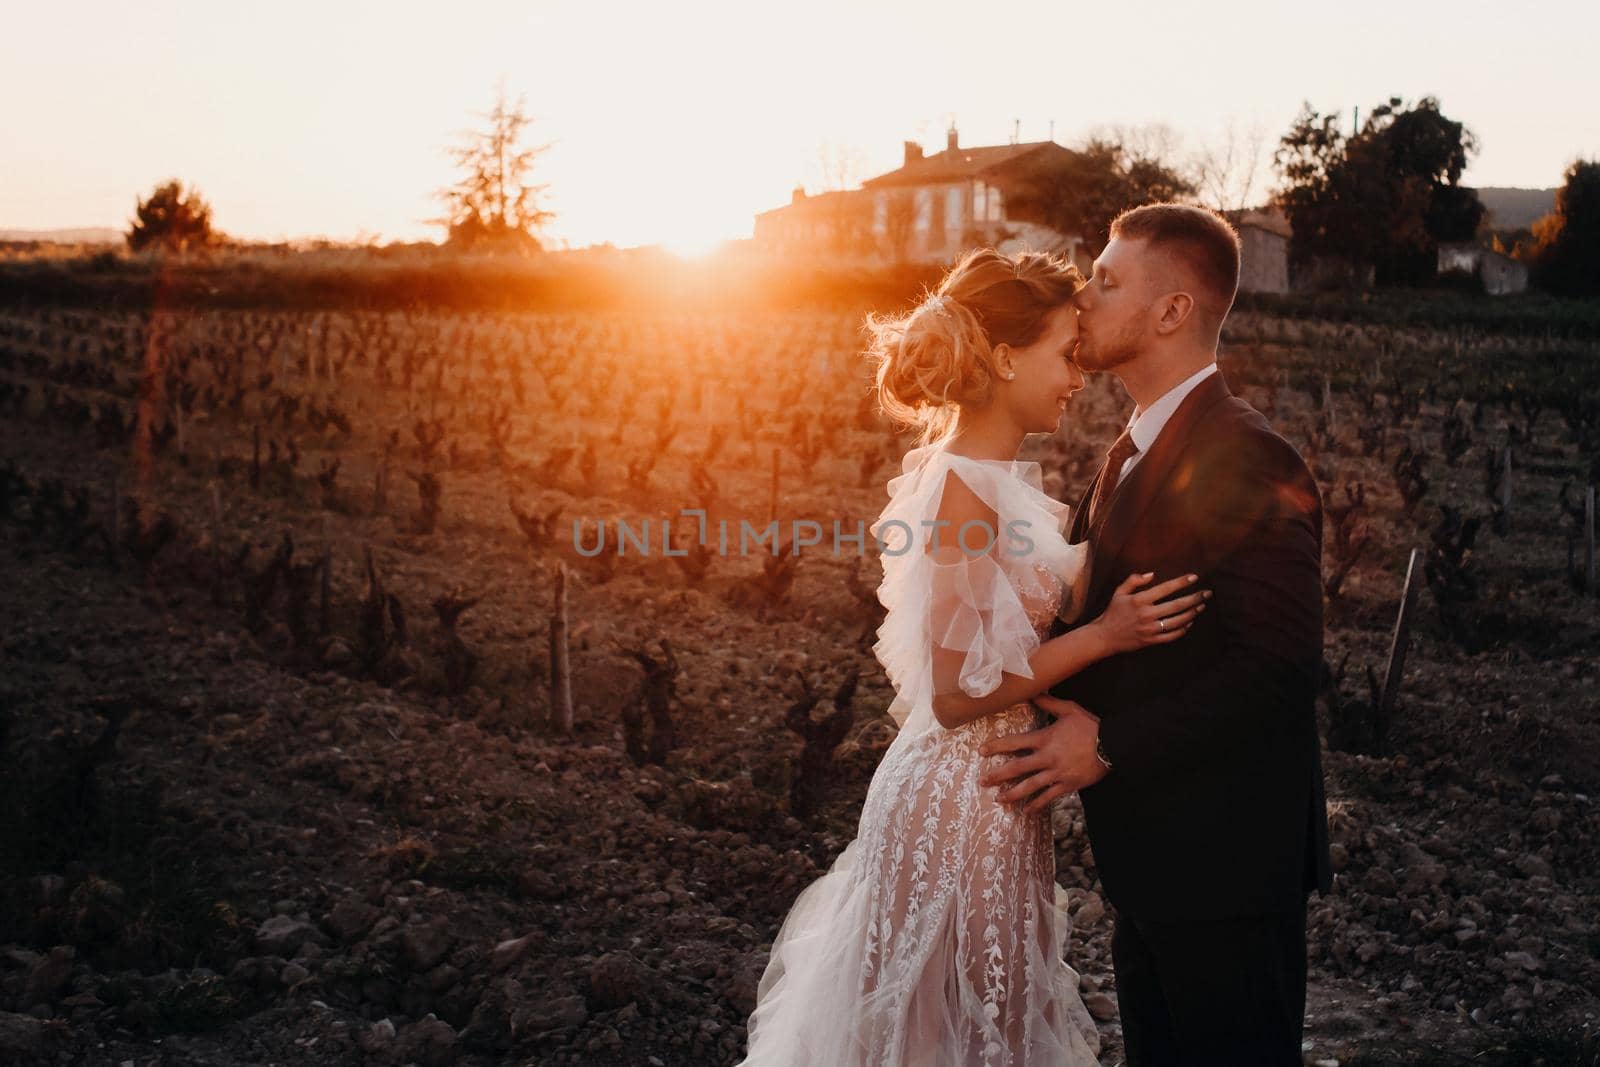 Wedding couple at sunset in France.Wedding in Provence.Wedding photo shoot in France.